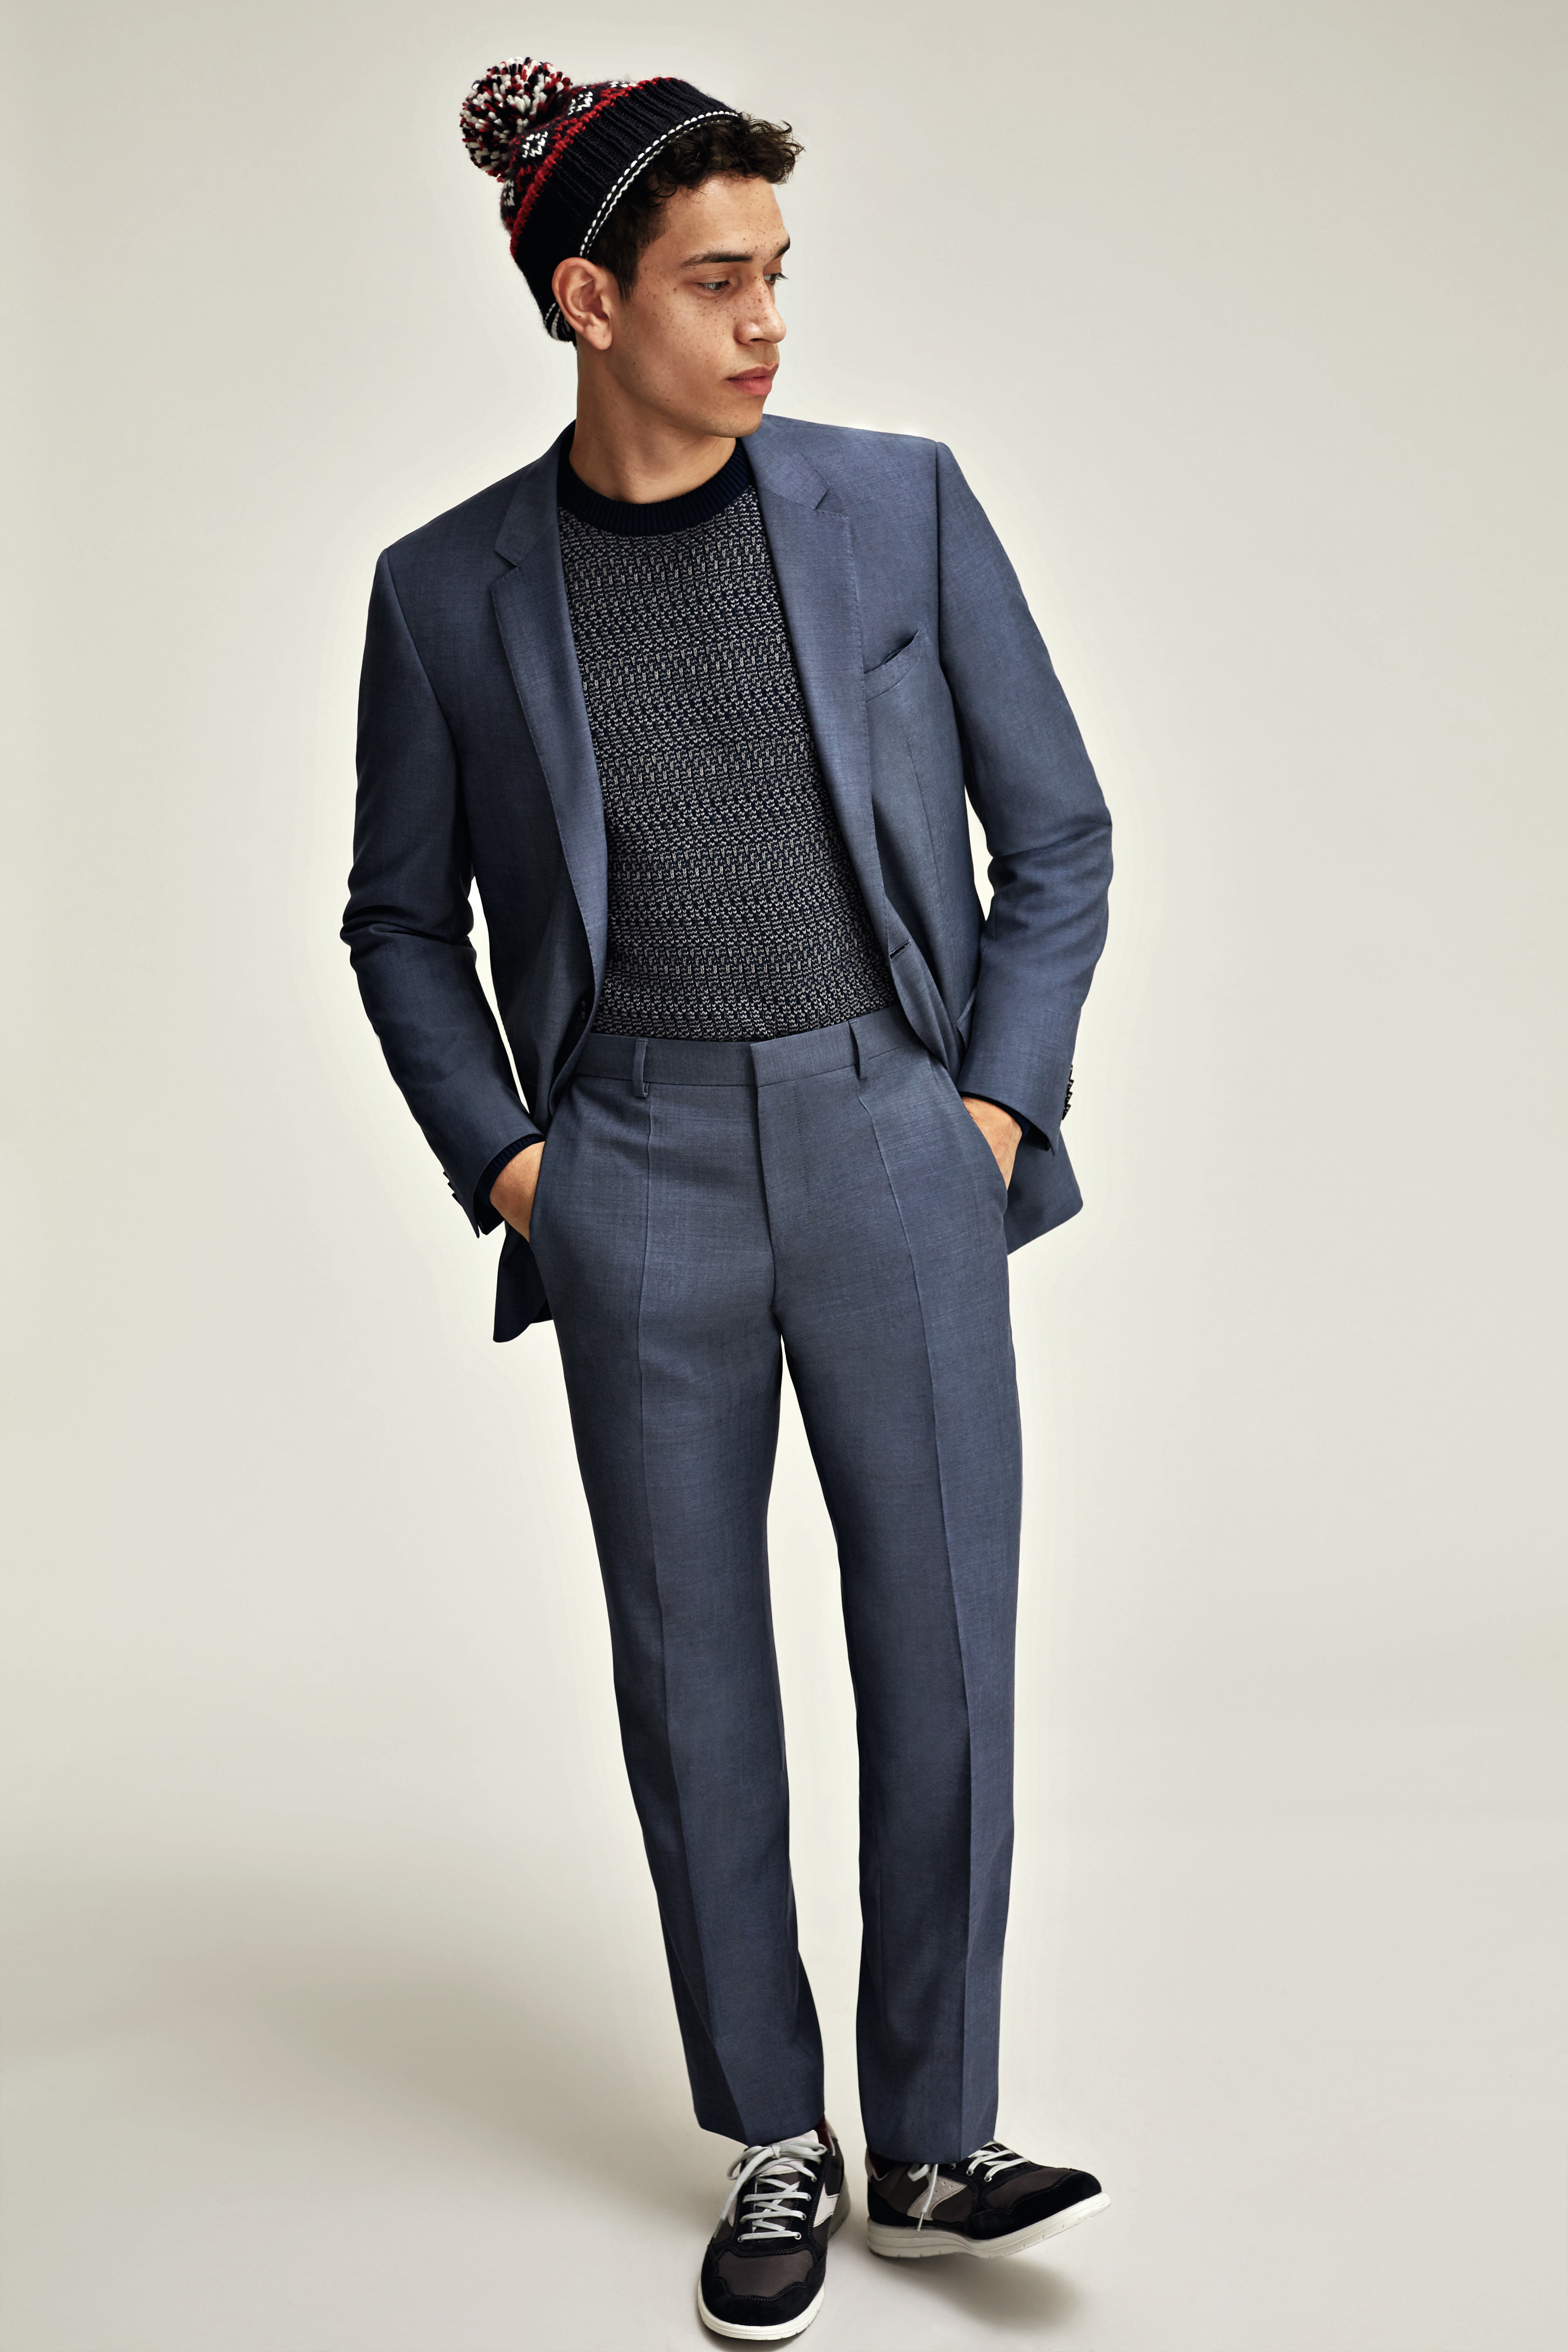 DADDY COOL: BUSINESS CASUAL LOOKS - FQ 